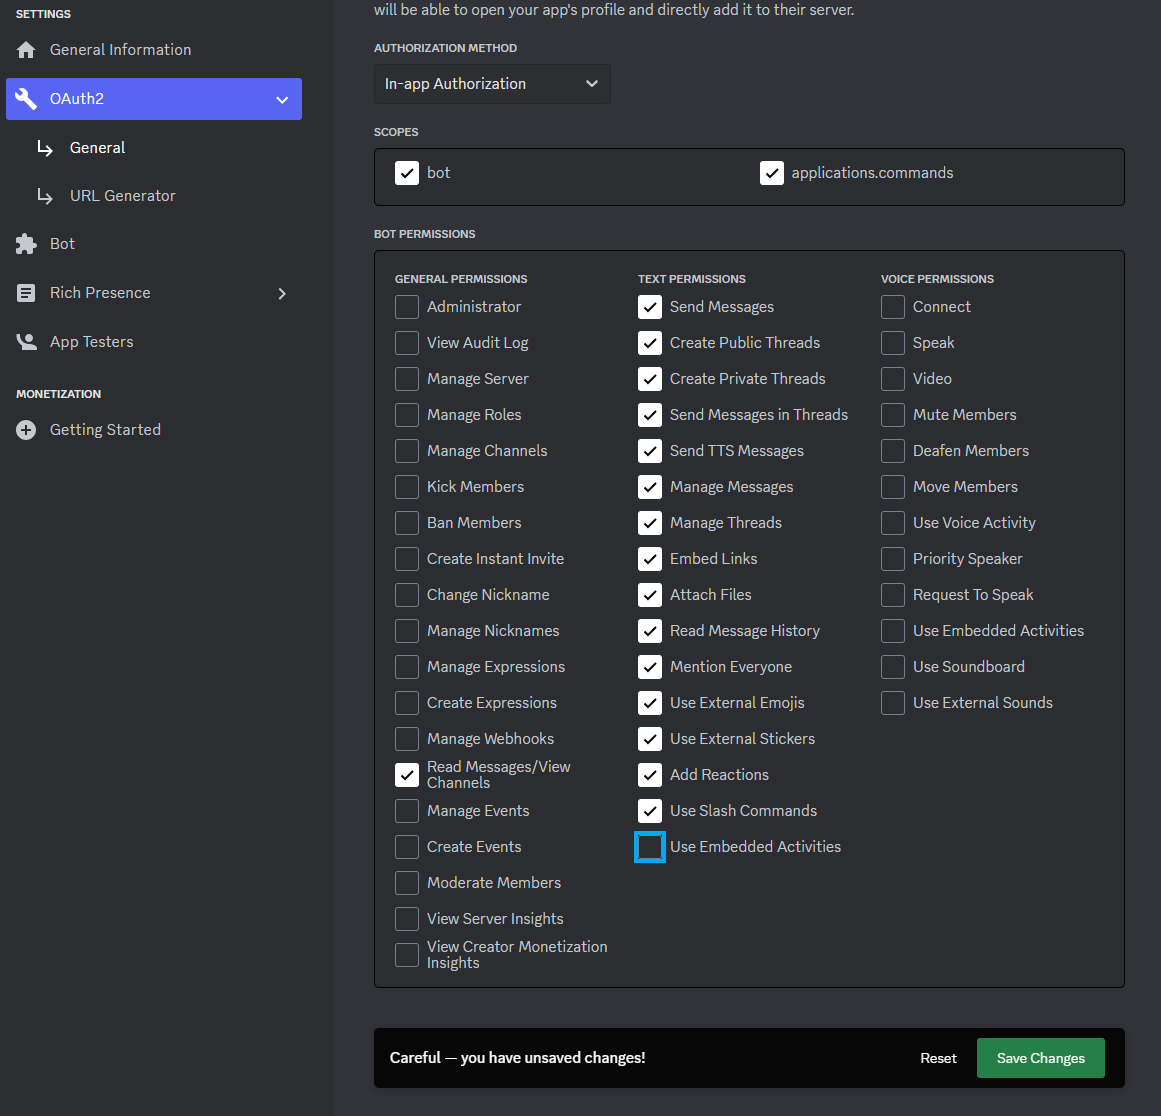 Screenshot of discord developer application screen with OAuth2 General tab selected. In the Scopes section, both "bot" and "applications.commands" options selected. In the Bot Permissions section, under "General Permissions" one option is selected: "Read Messages/View Channels", under "Text Permissions" all options are selected except for "Use Embedded Activities", and under "Voice Permissions" no options are selected.